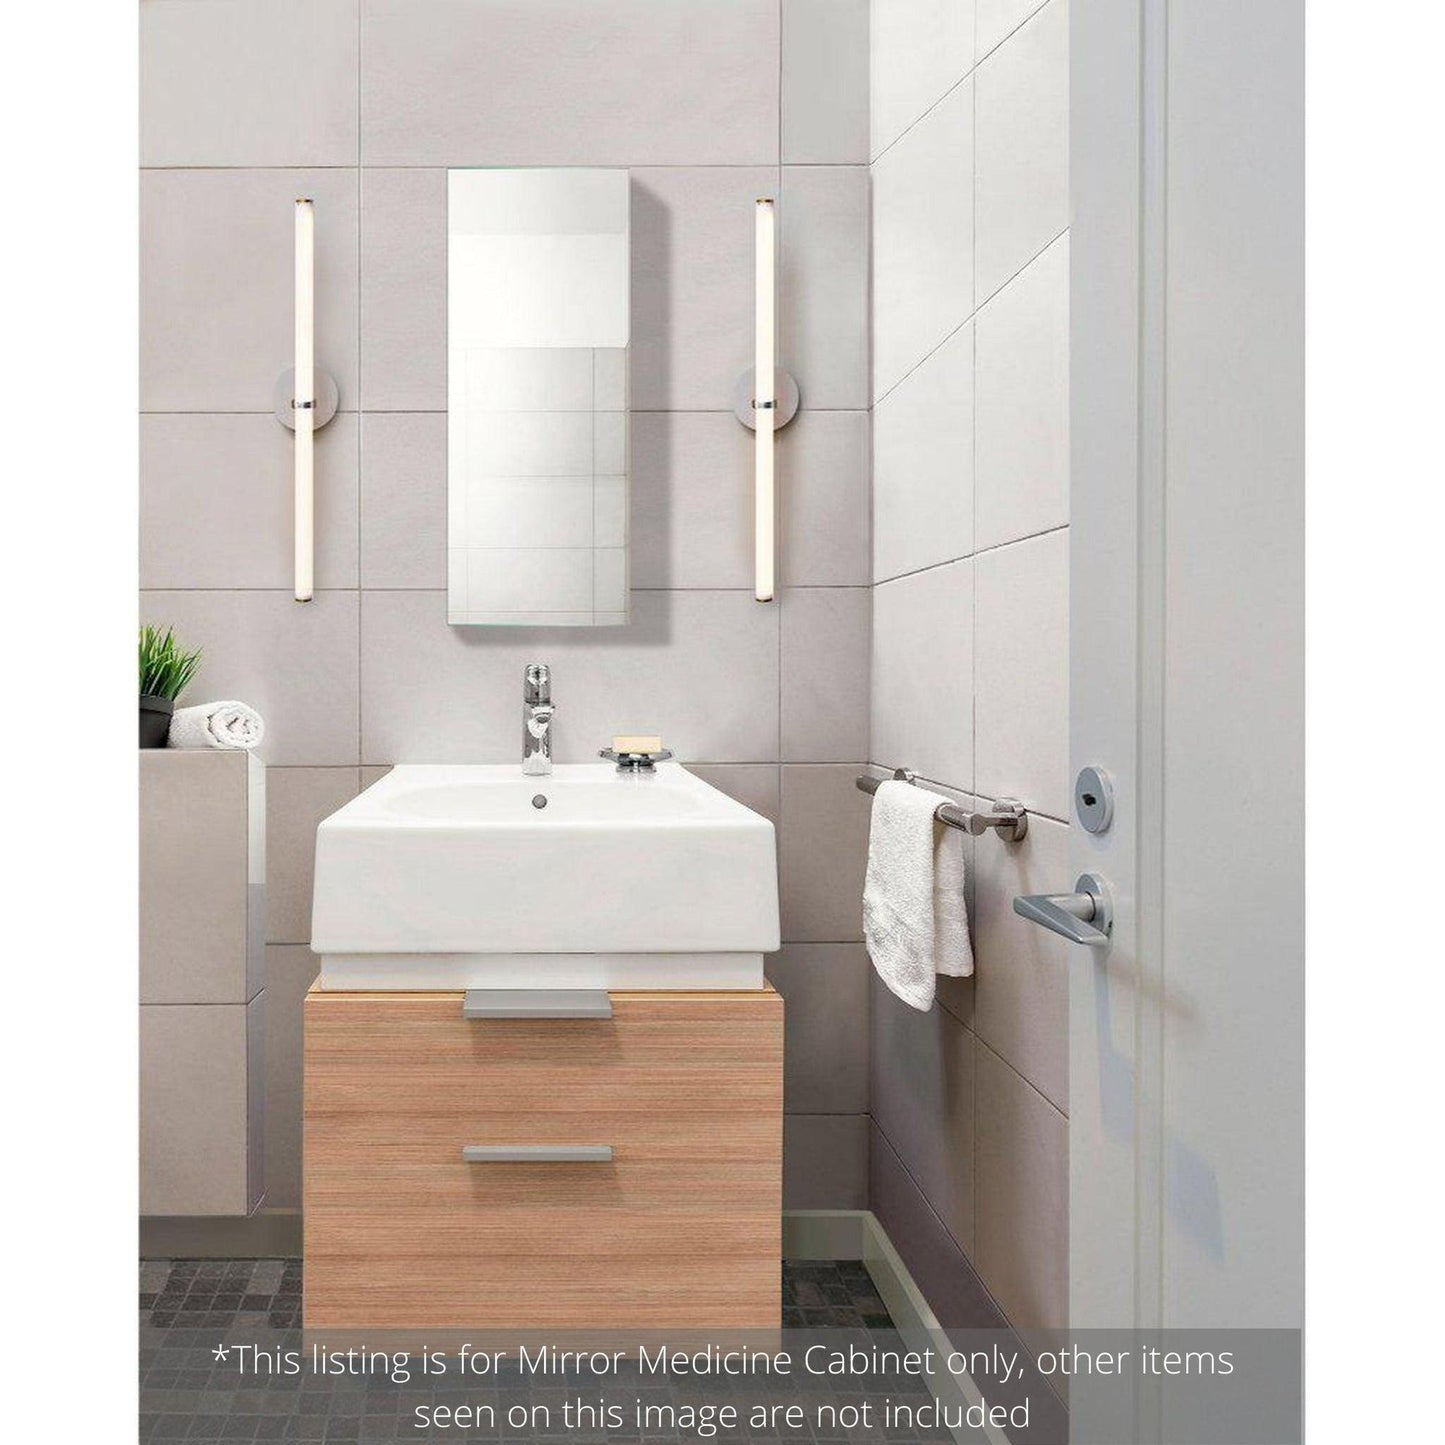 Krugg Reflections Plaza 12" x 30" Single Left Opening Rectangular Recessed/Surface-Mount Medicine Cabinet Mirror With Two Adjustable Shelves